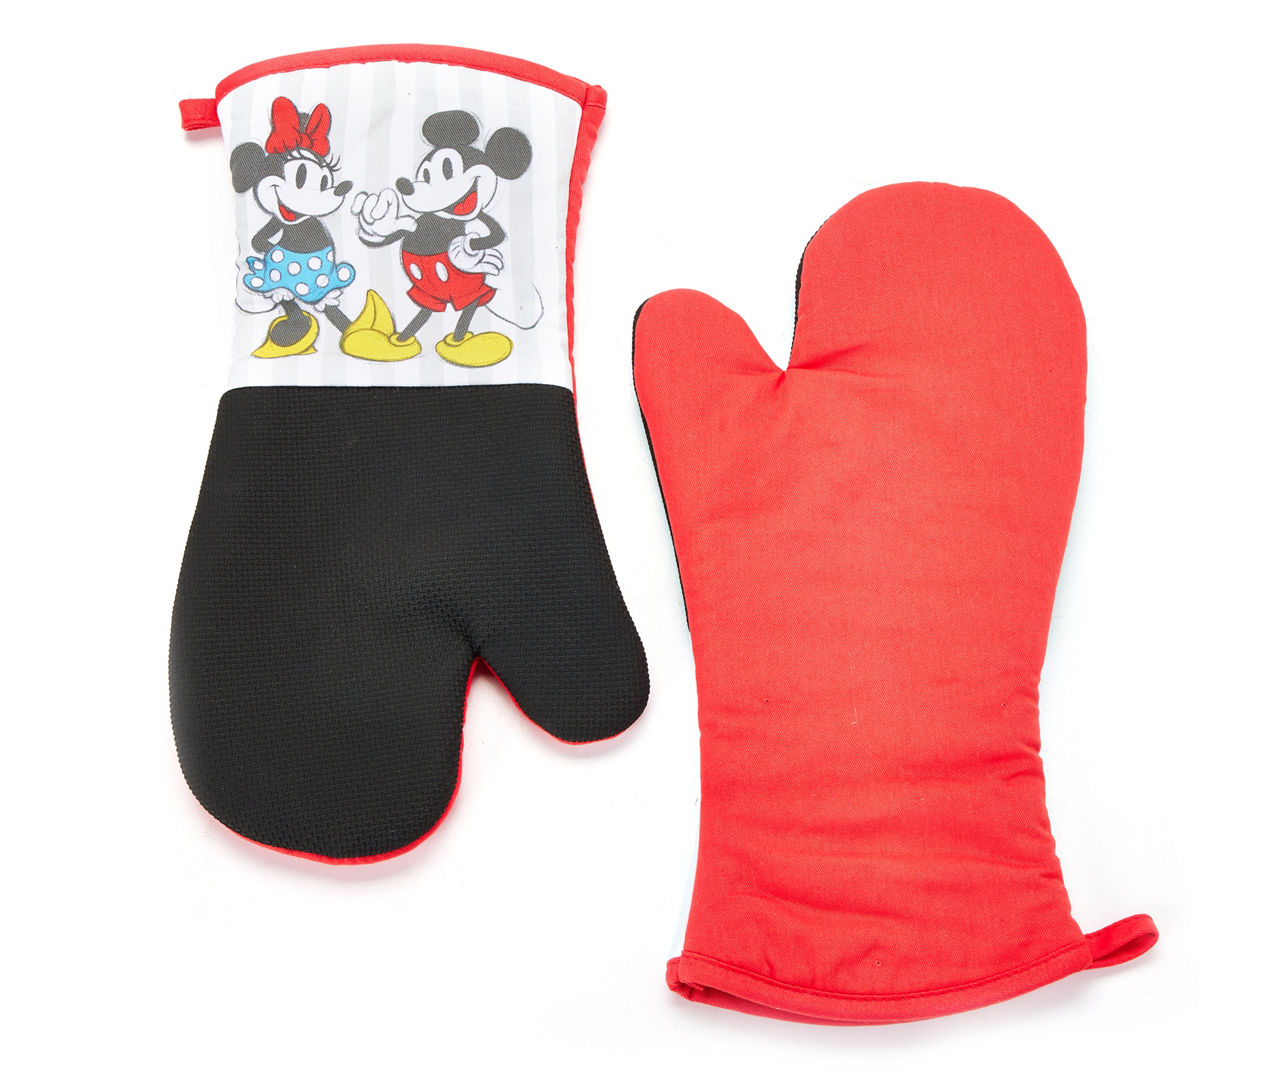 Disney Red & White Mickey & Minnie Mouse Oven Mitts, 2-Pack